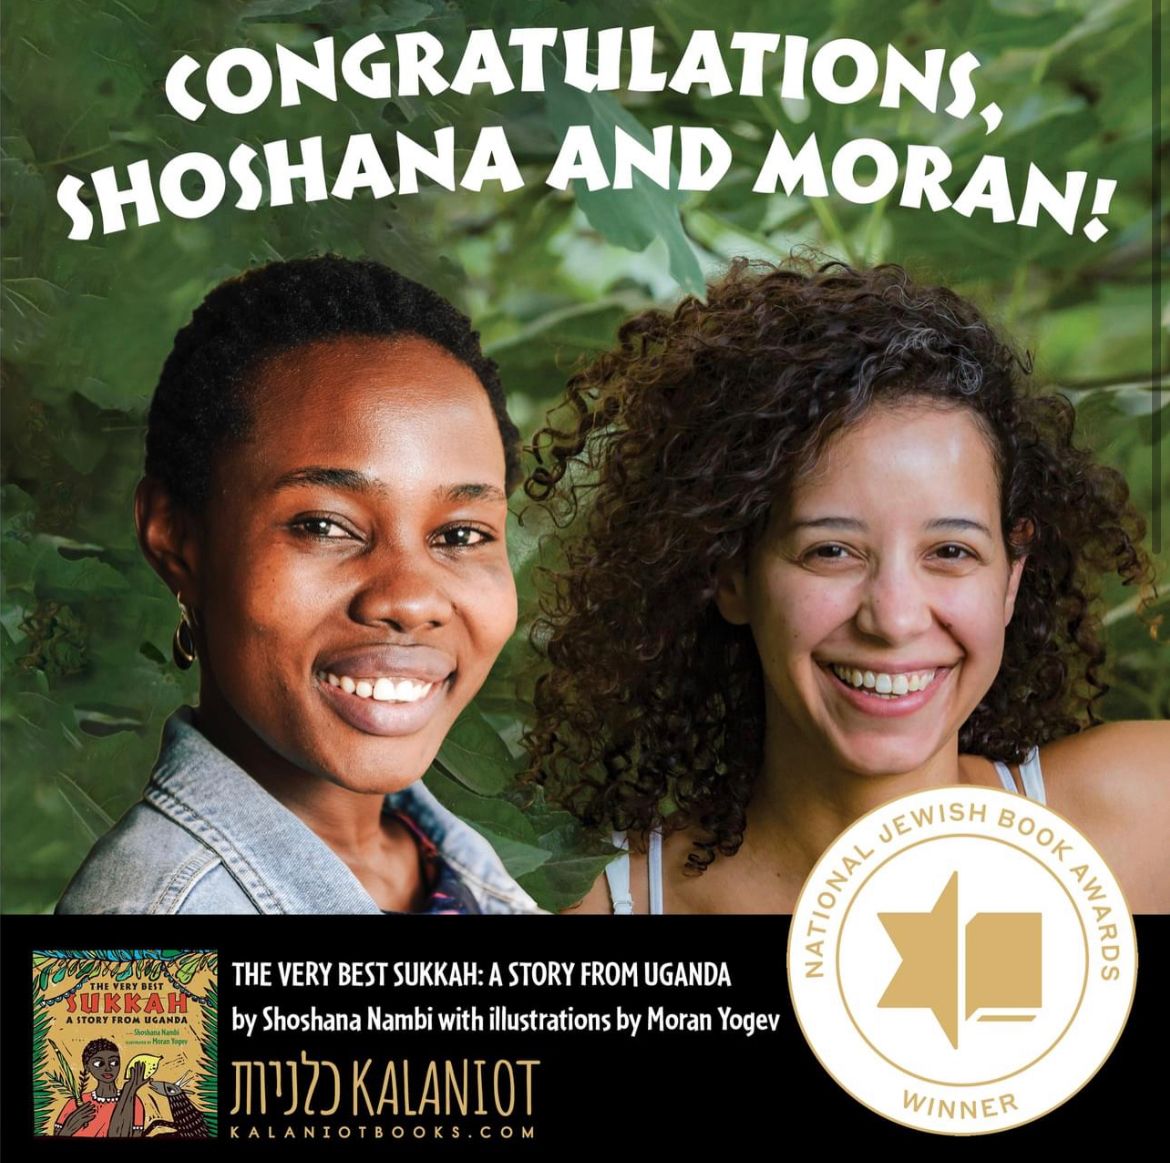 Congratulations Kalaniot Books for winning the inau­gur­al Children’s Picture Book Tra­cy and Lar­ry Brown Fam­i­ly Award for THE VERY BEST SUKKAH: A STORY FROM UGANDA at the National Jewish Book Awards!
#indiepublishers #diversevoices #ChildrensBooks #jewishculture